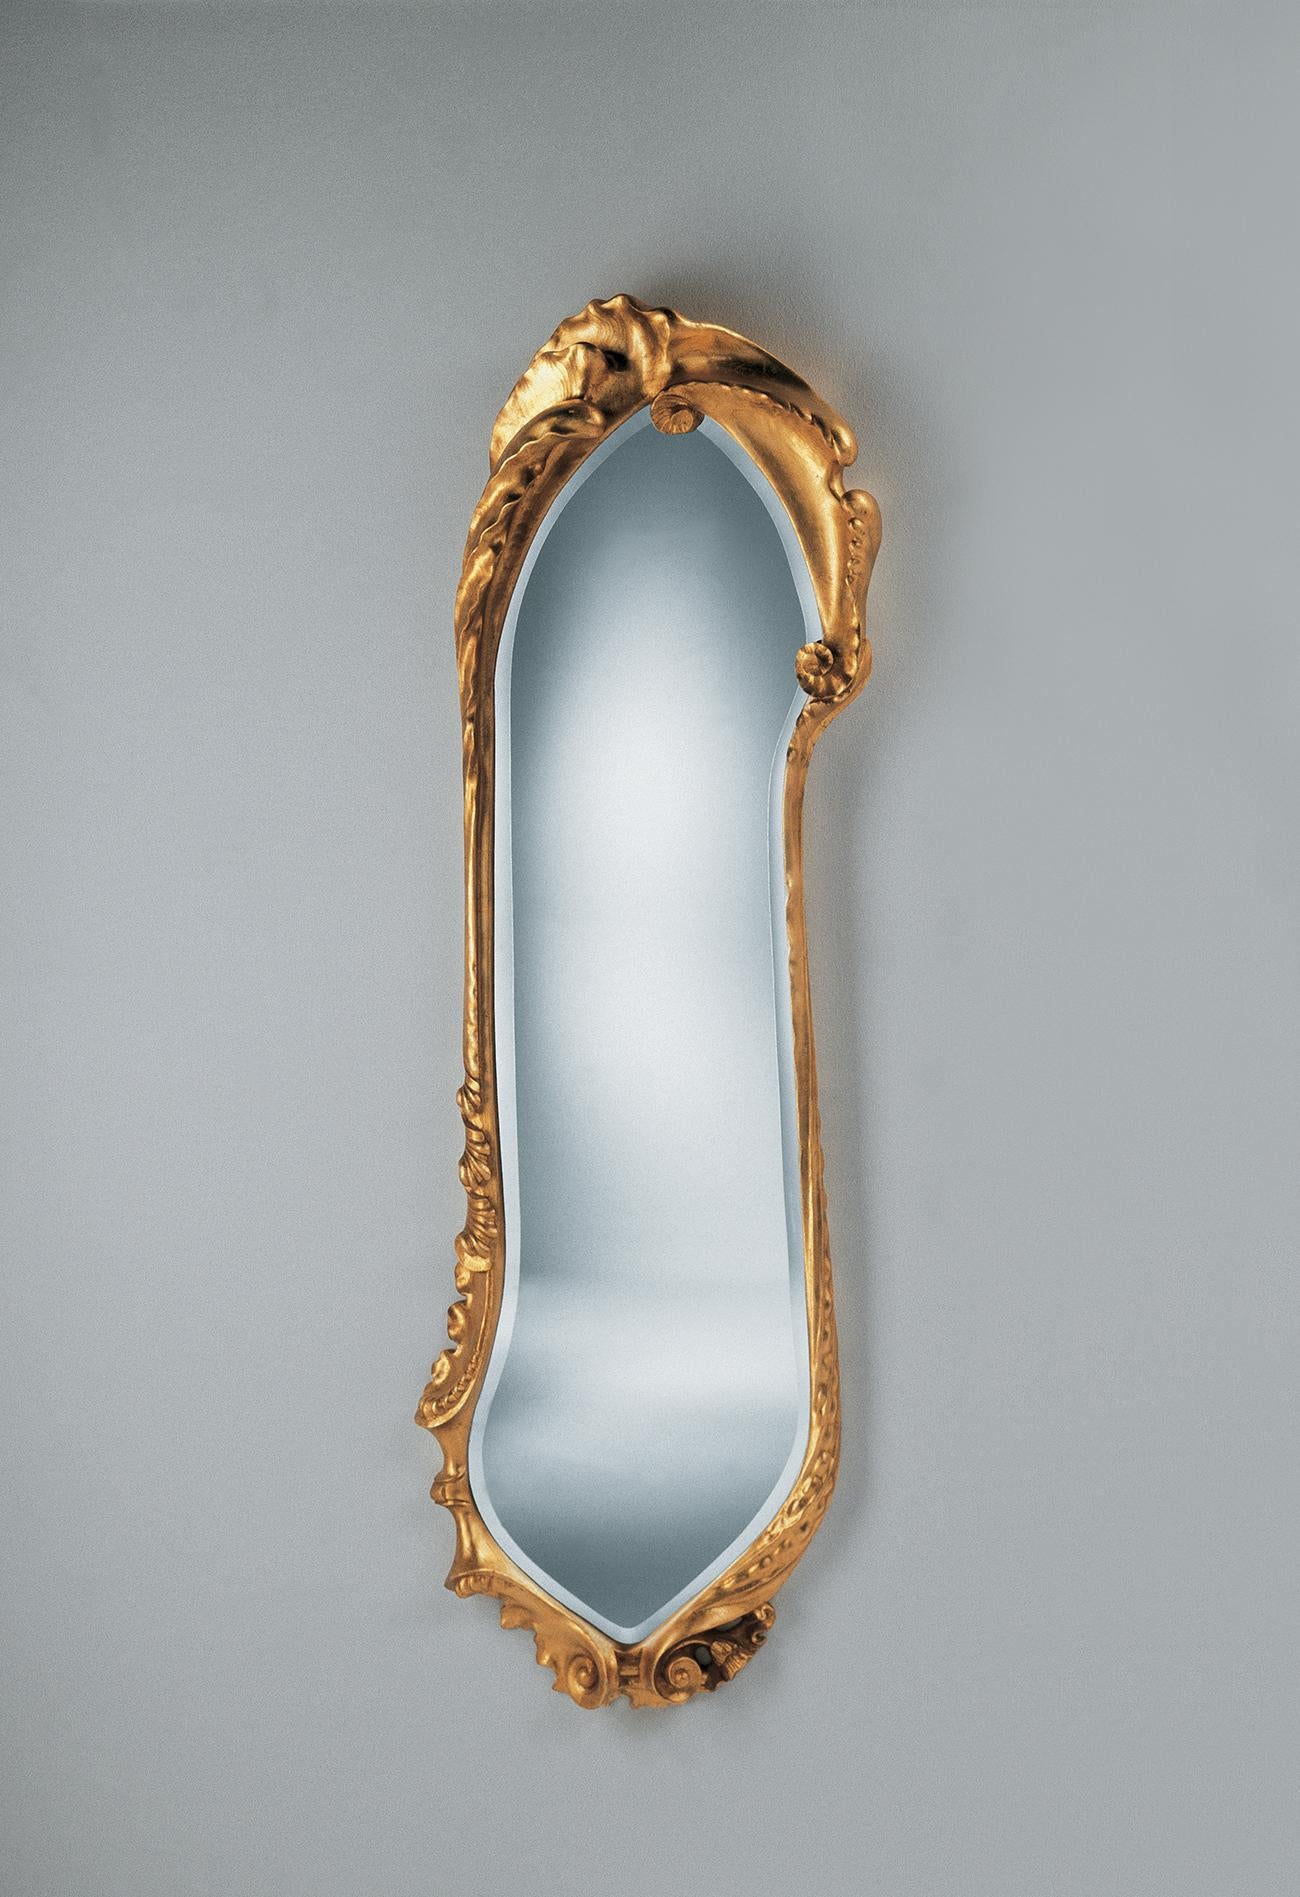 Calvet golden mirror, Antonio Gaudí
1902
Dimensions: 58 cm x H 195 cm
Materials: Solid oak varnished or coated in fine golden brass sheets using a gold leaf technique


Antoni Gaudí (1852/1926) is, without doubt, the most internationally